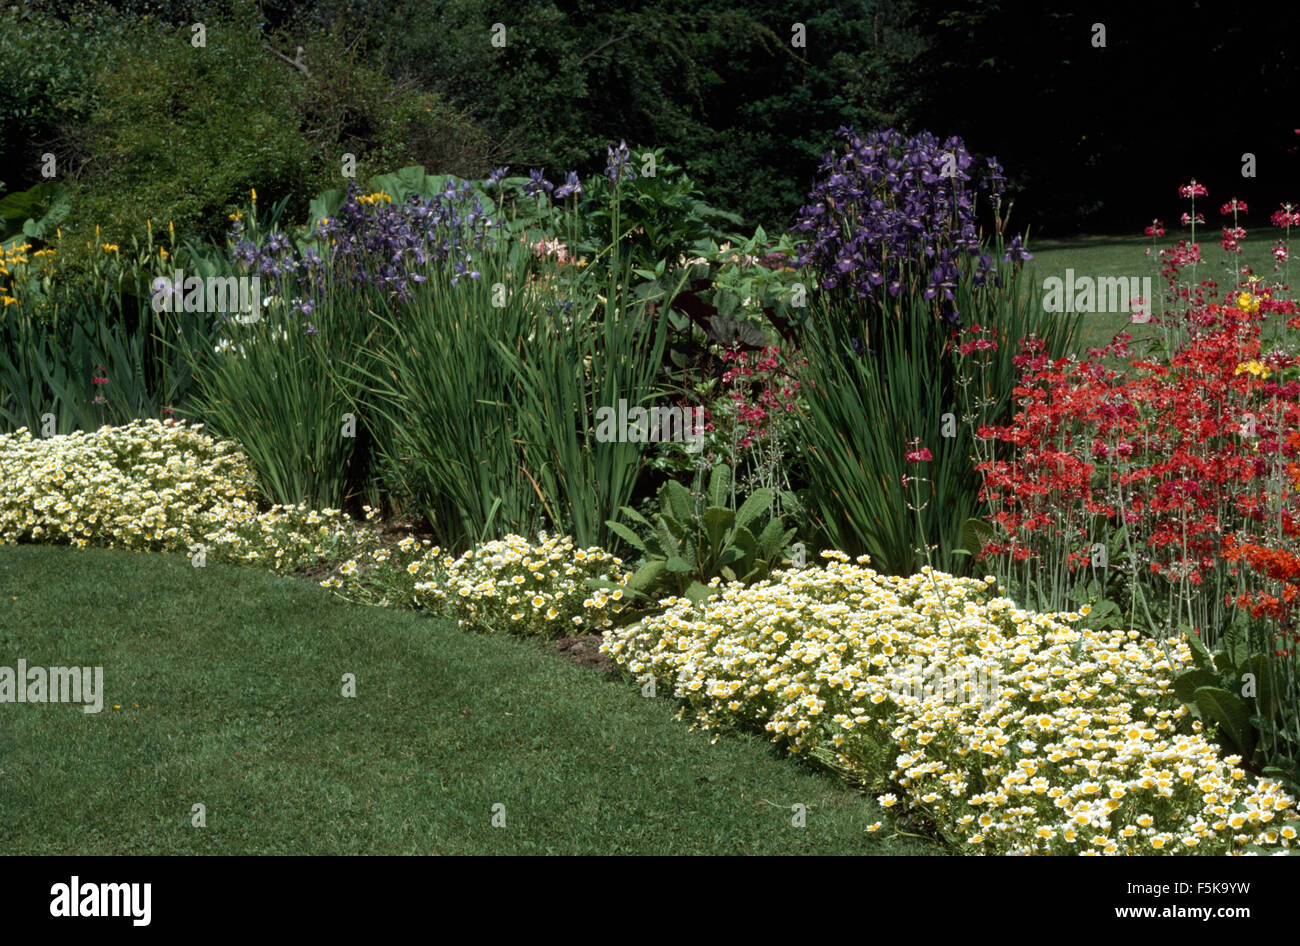 Border with blue iris and red Candelabra Primroses edged with Poached Egg Plants Stock Photo